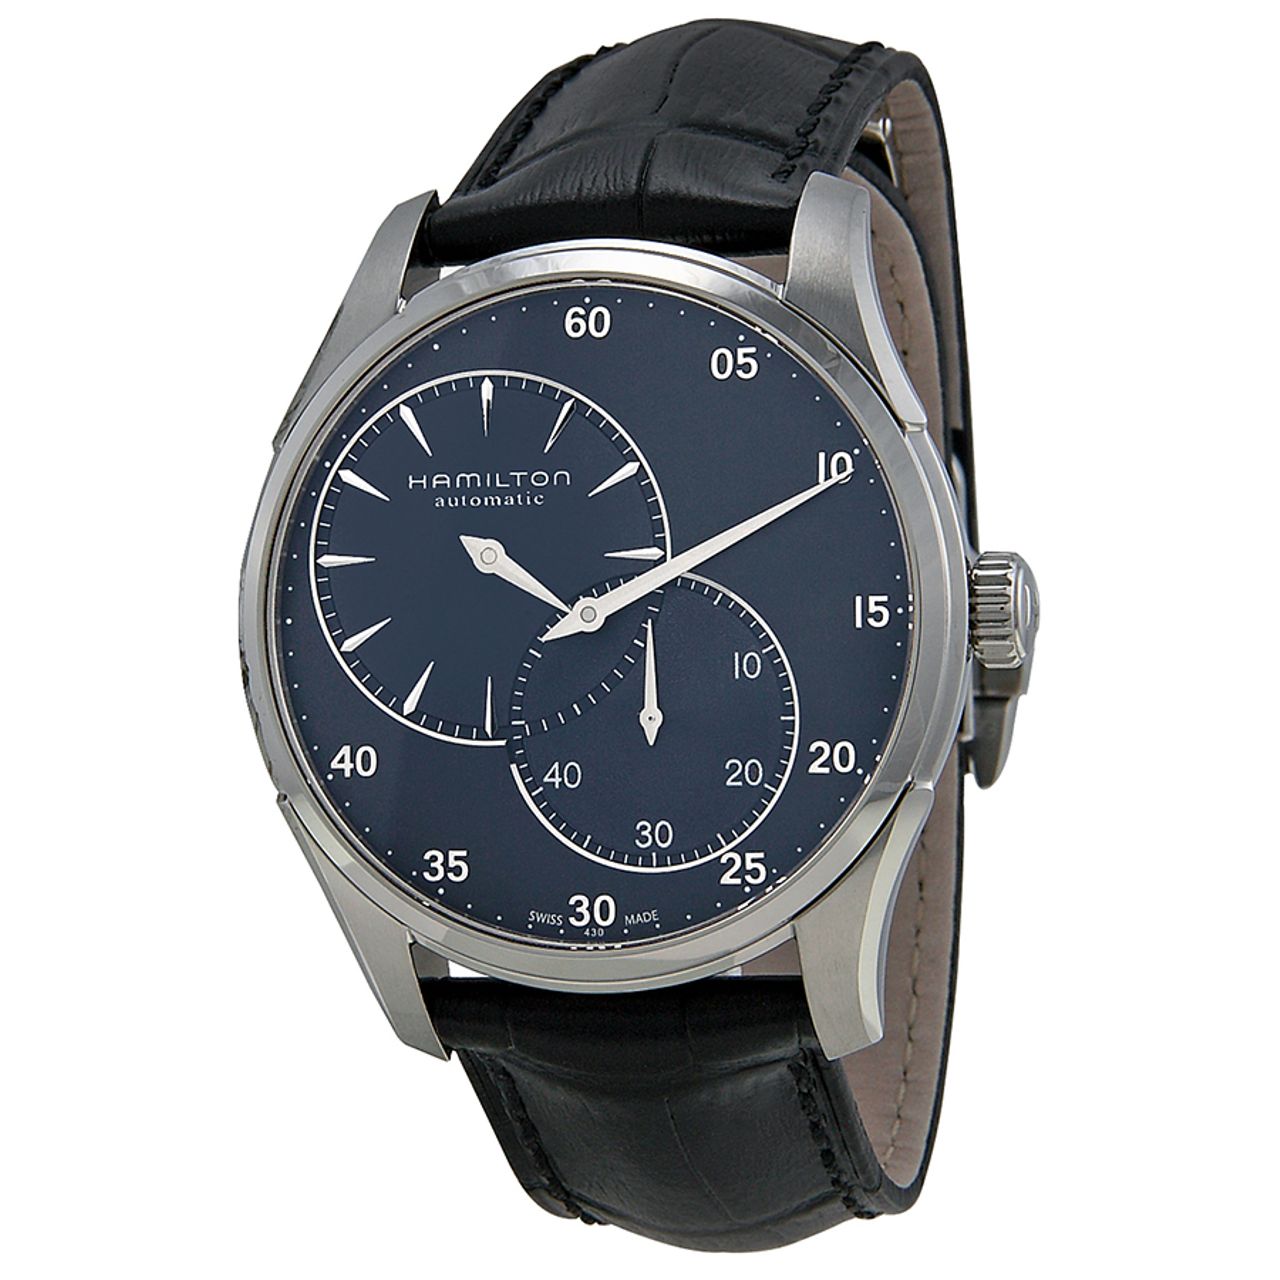 Hamilton H42615743 Mens Blue Dial Analog Automatic Watch with Leather Strap